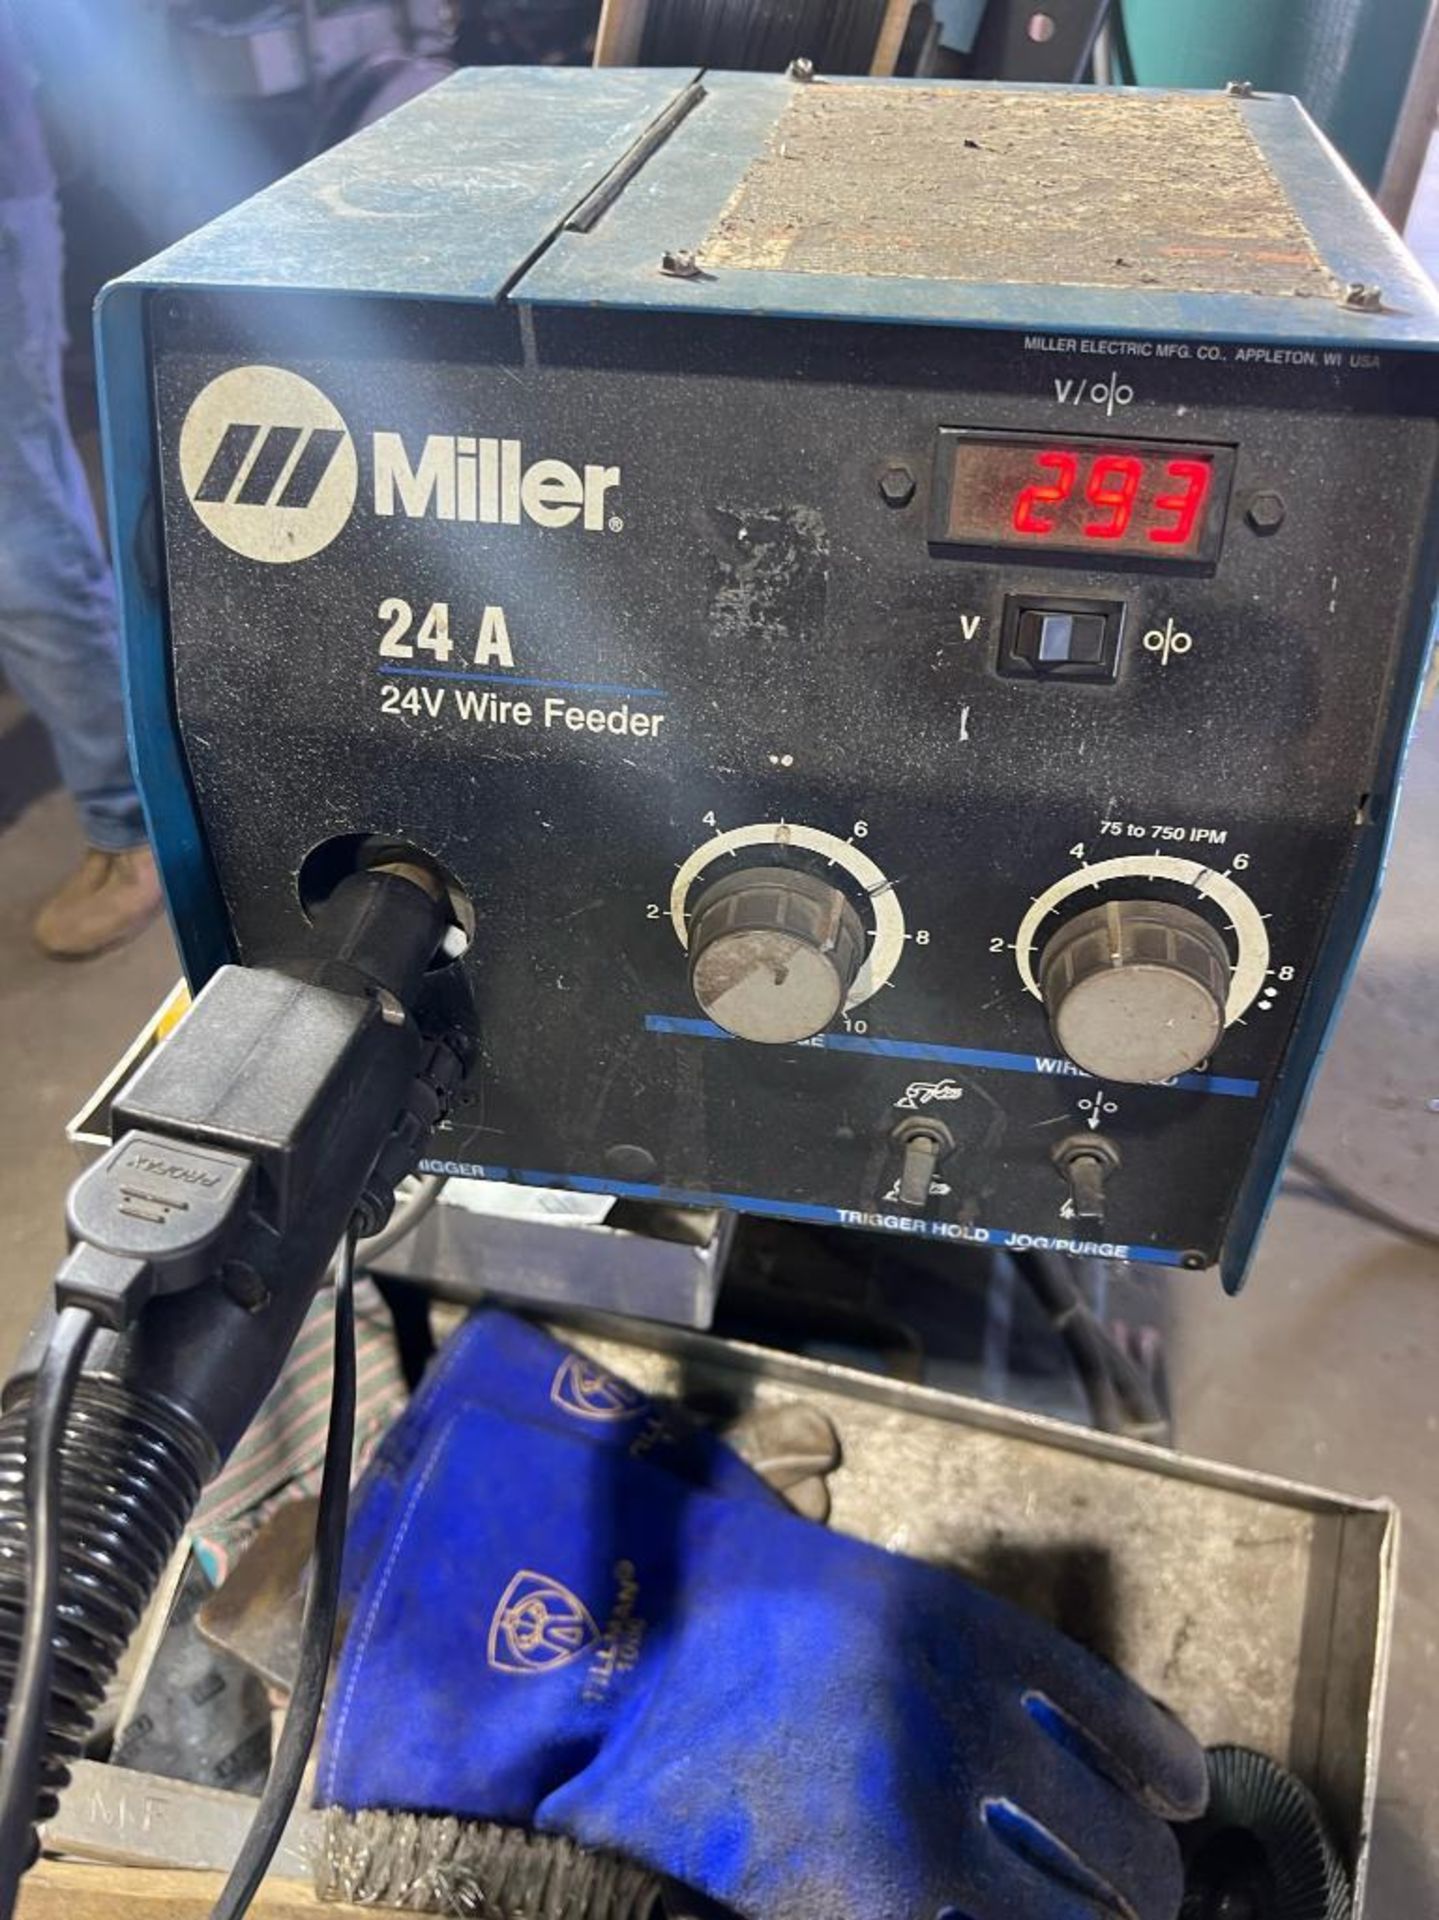 Miller XMT50 Wire Feed Welder, Sold with Cart & Miller 24A 24V Wire Feeder, Single Phase, Bottles No - Image 3 of 4